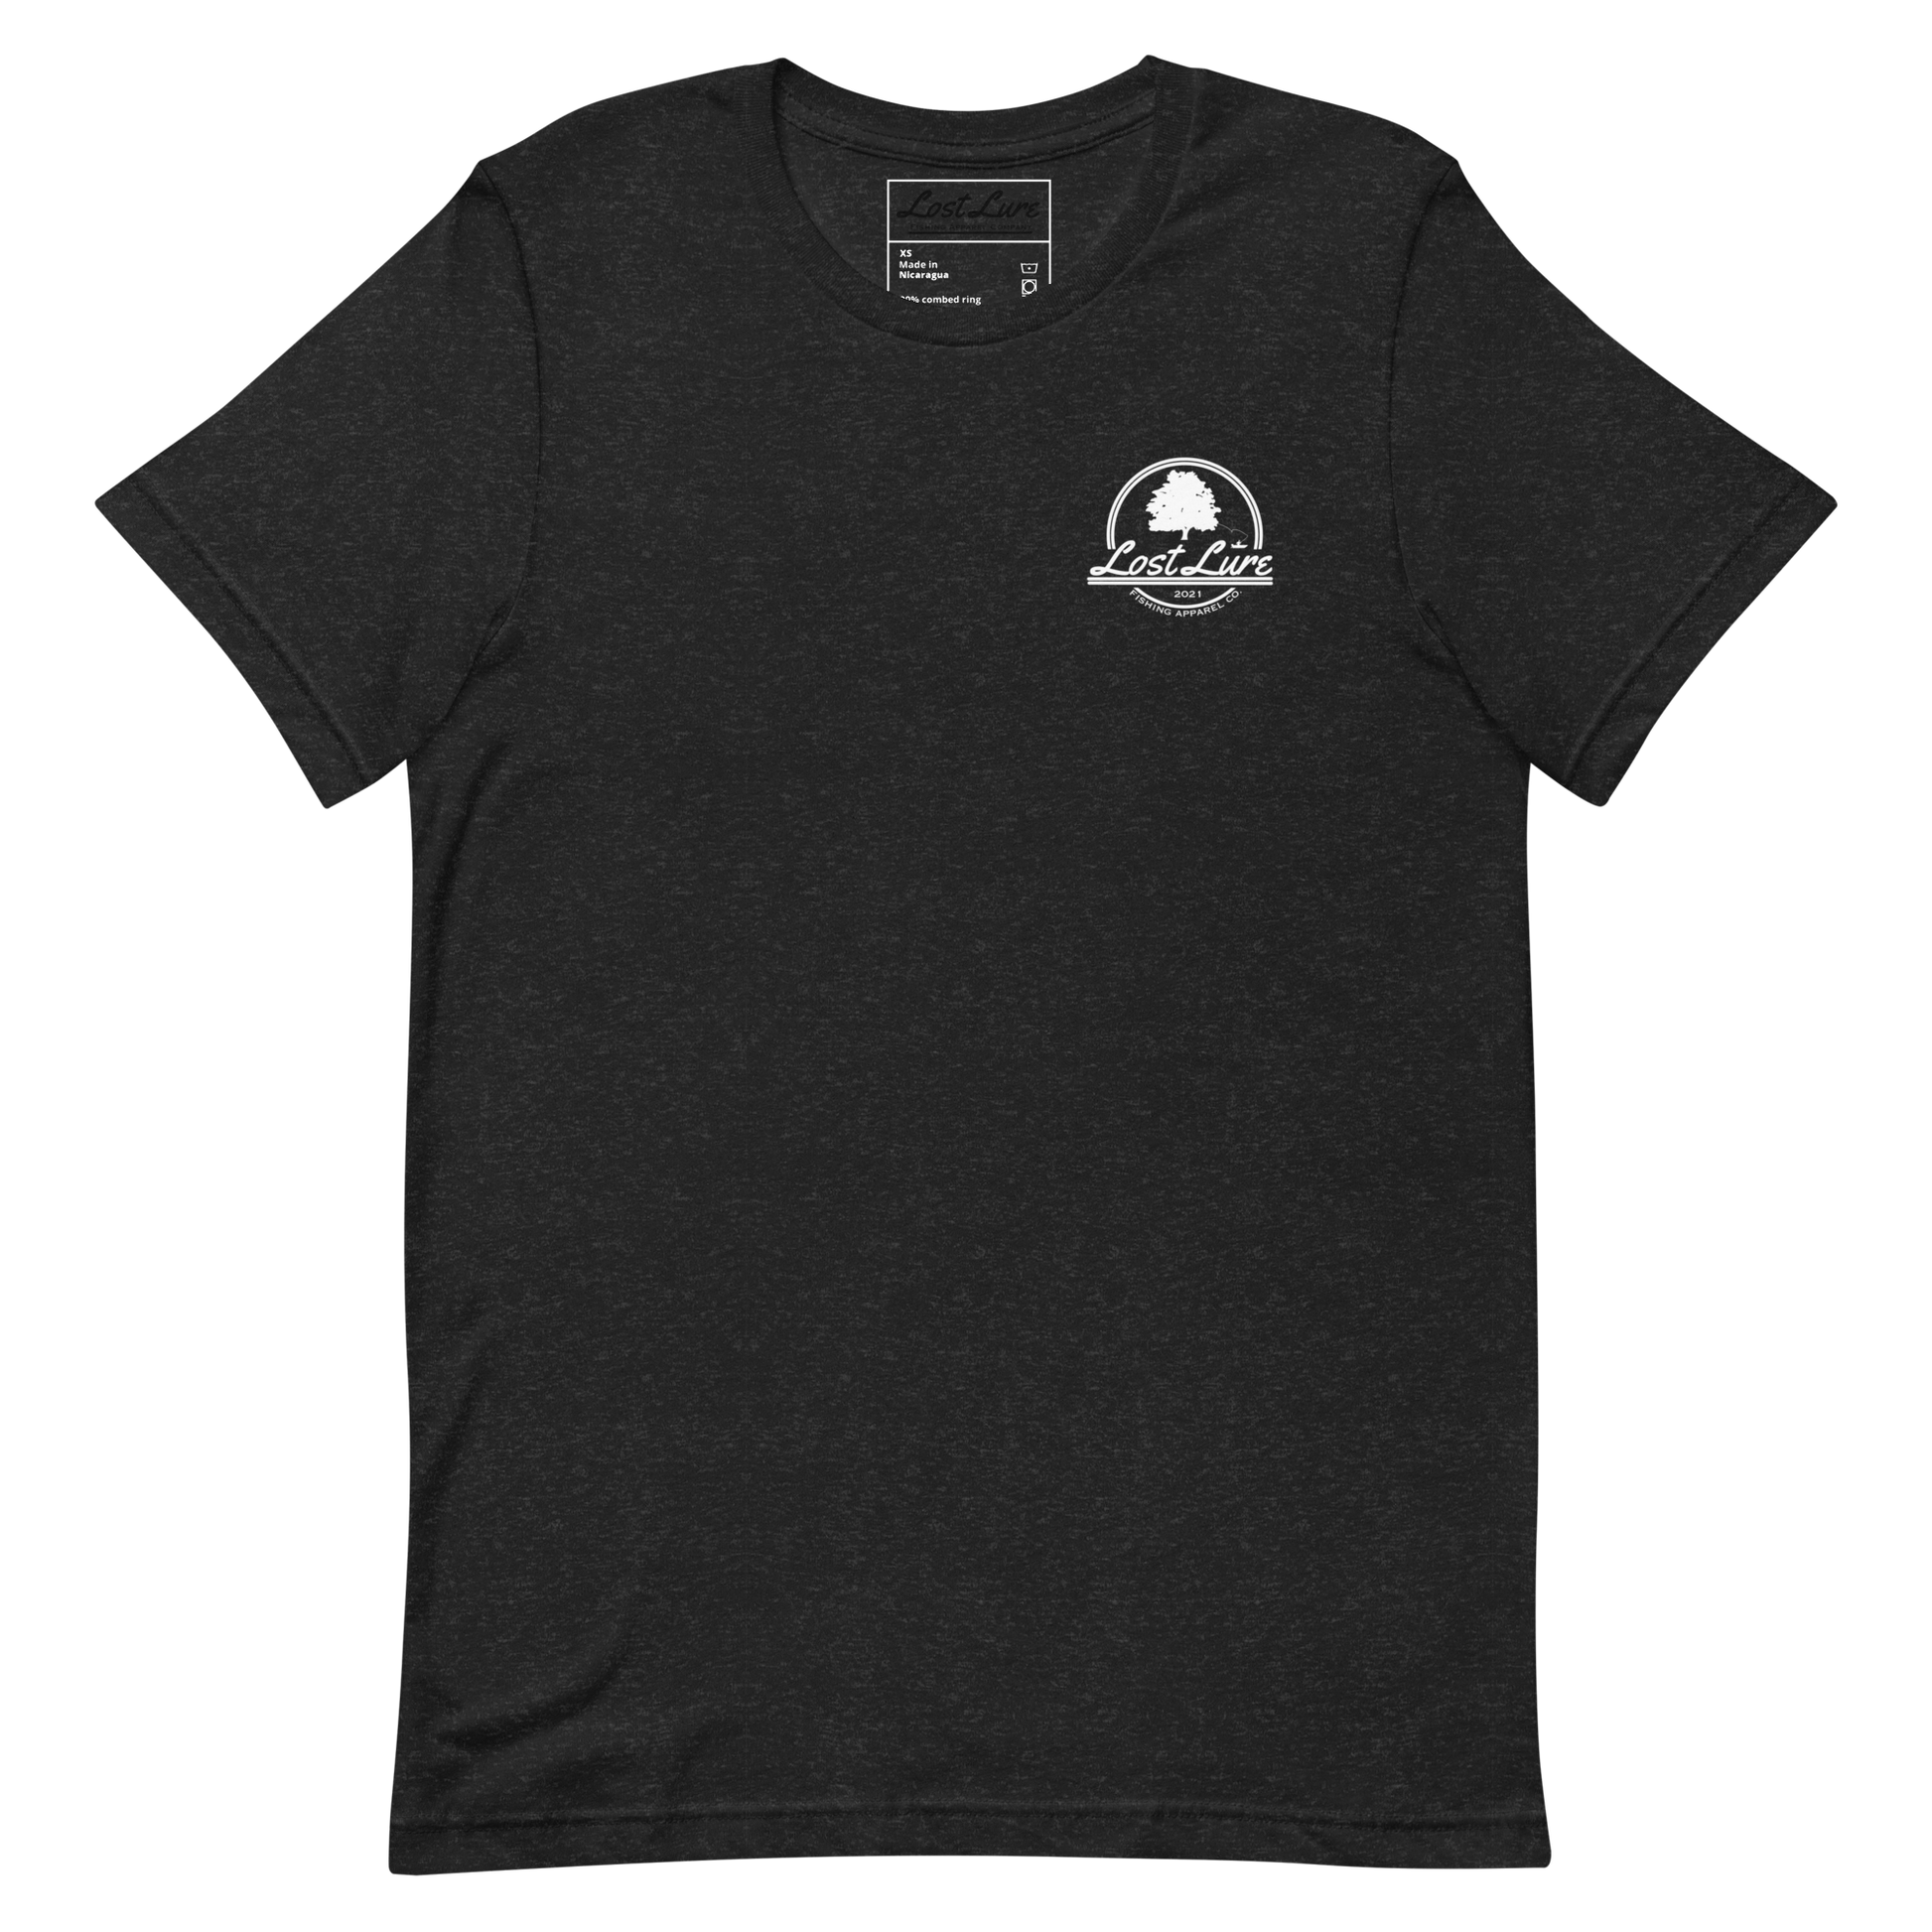 Cutthroat Trout fishing shirt. It’s an American traditional style design with a cutthroat trout and a dagger. The shirt reads Cutthroat trout, est. 2021, lost lure fishing apparel company. The front of the shirt has the lost lure logo. Dark grey shirt , front side